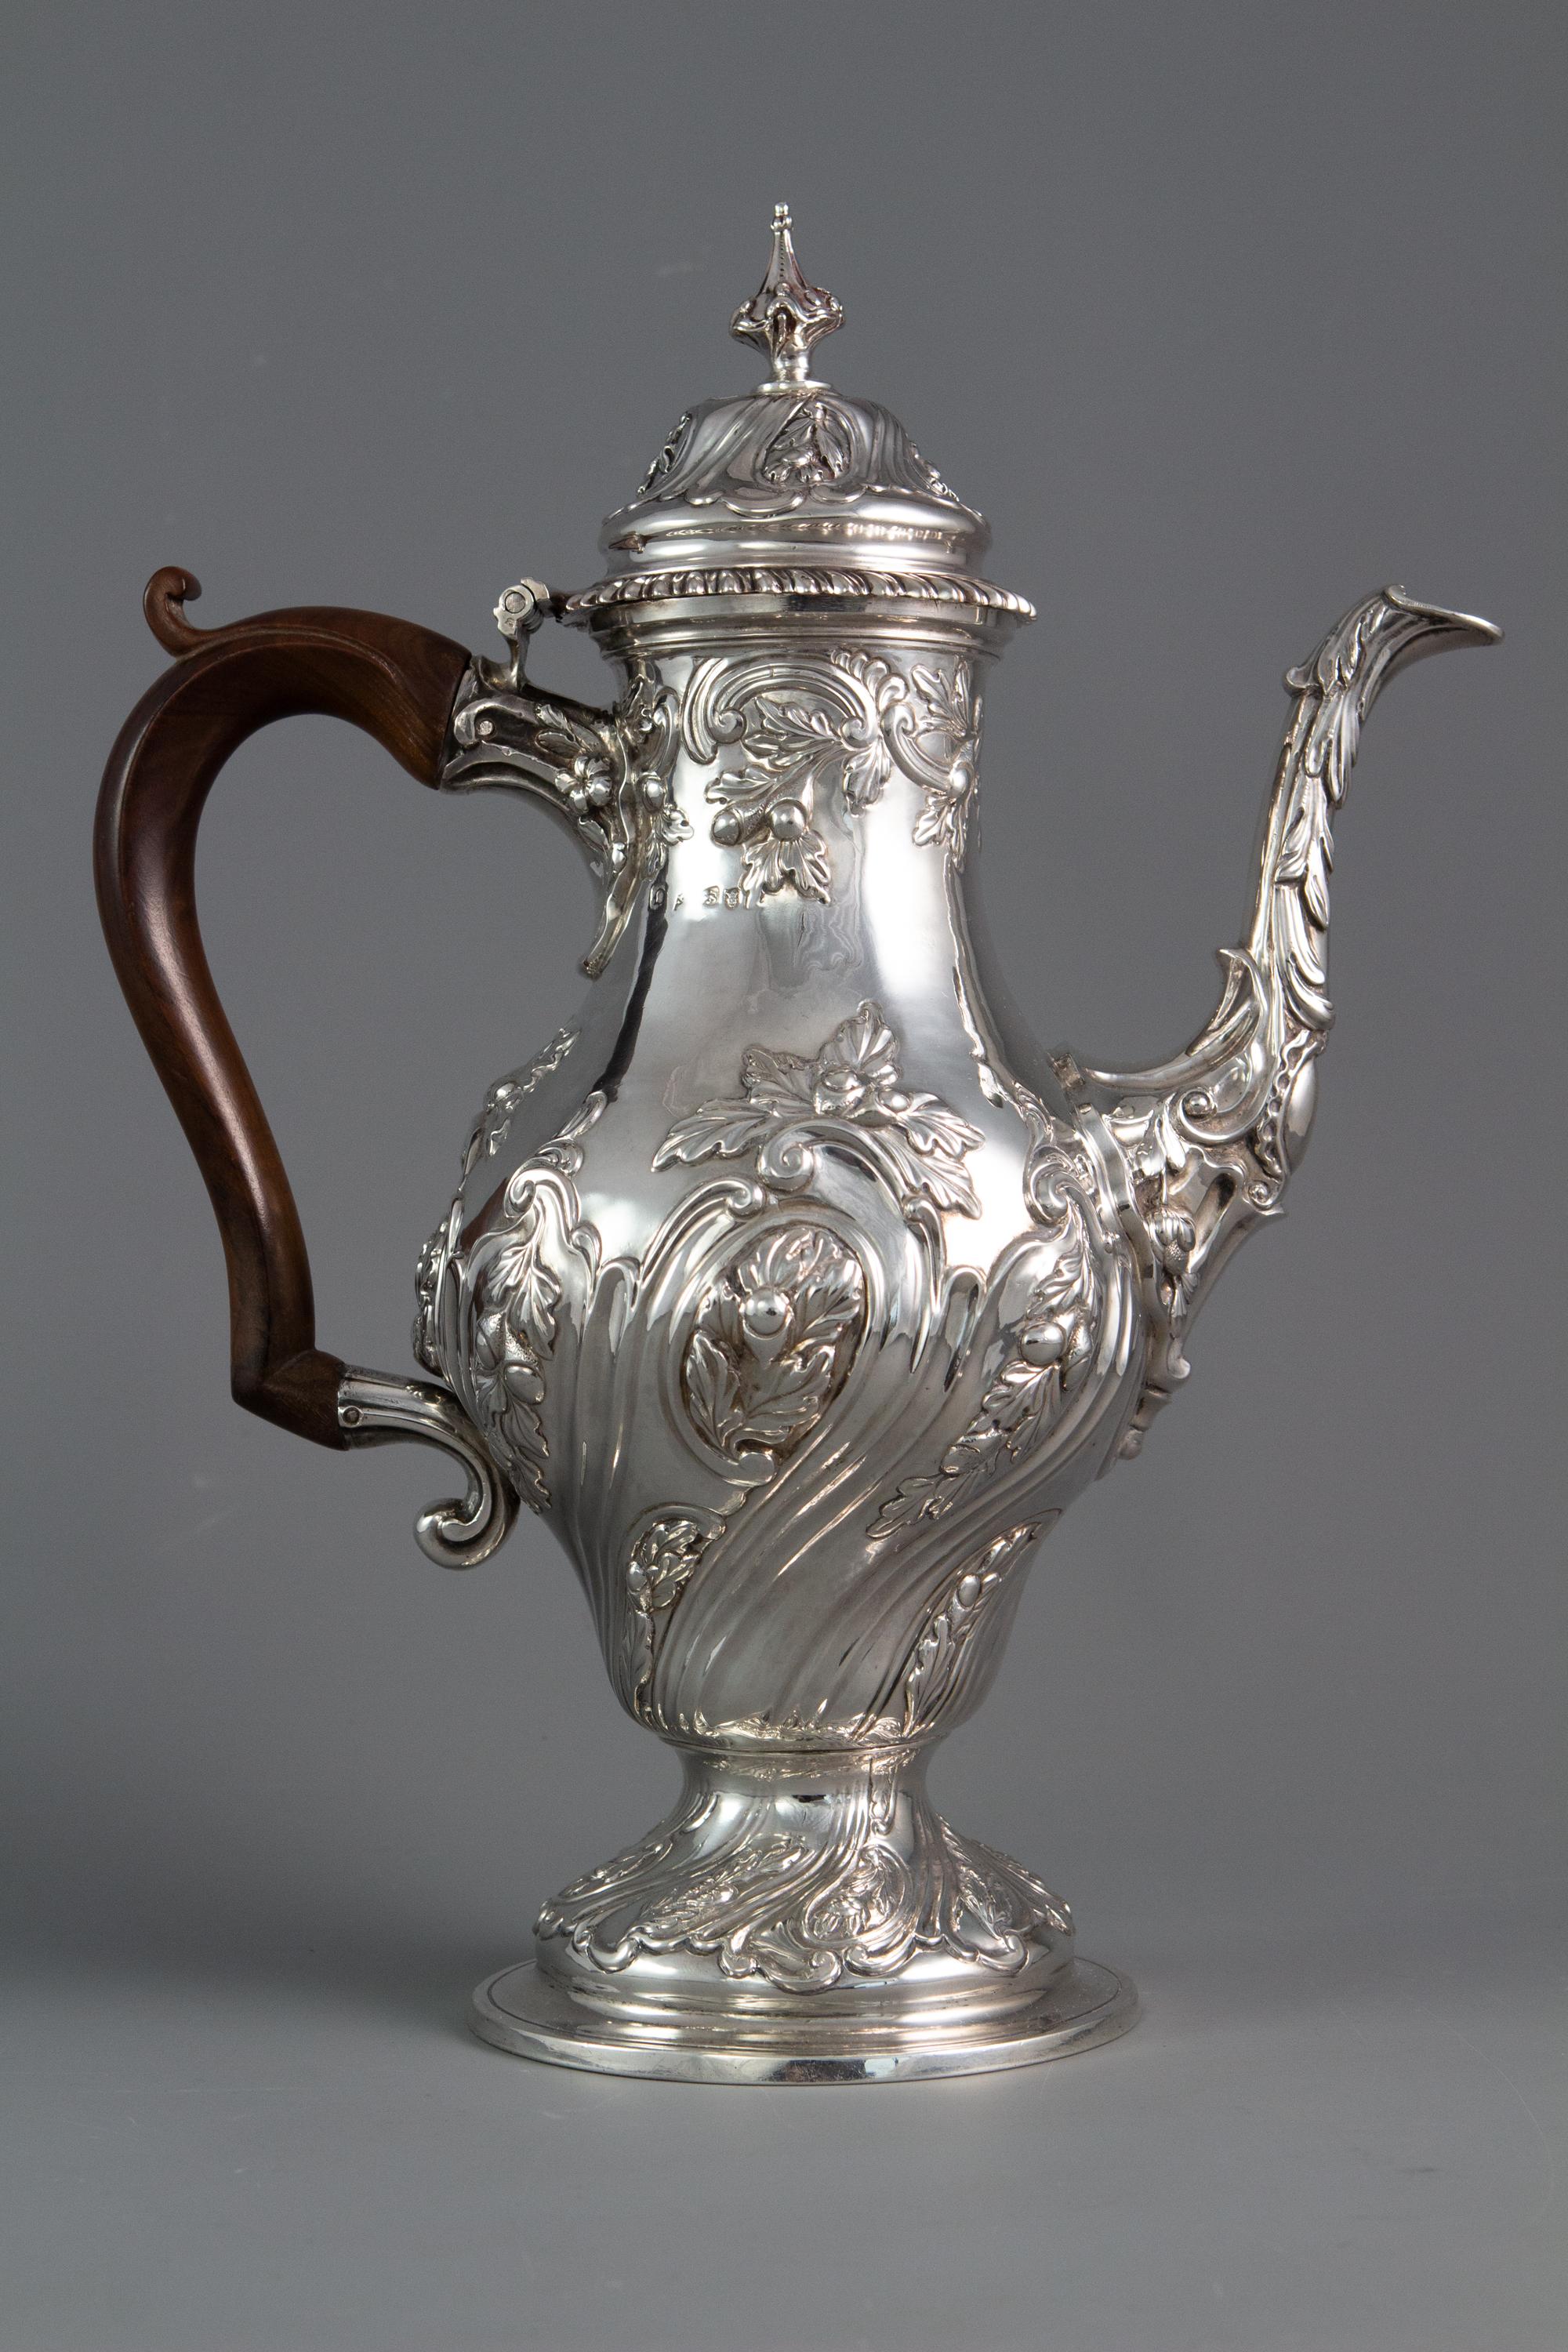 A George III silver coffee pot, London 1769 by William Abdy. The body of double pear-shaped form with embossed spiral-fluted foliate decoration. A floral decorated cast spout and handle mountings. The hinged lid with matching decoration and a